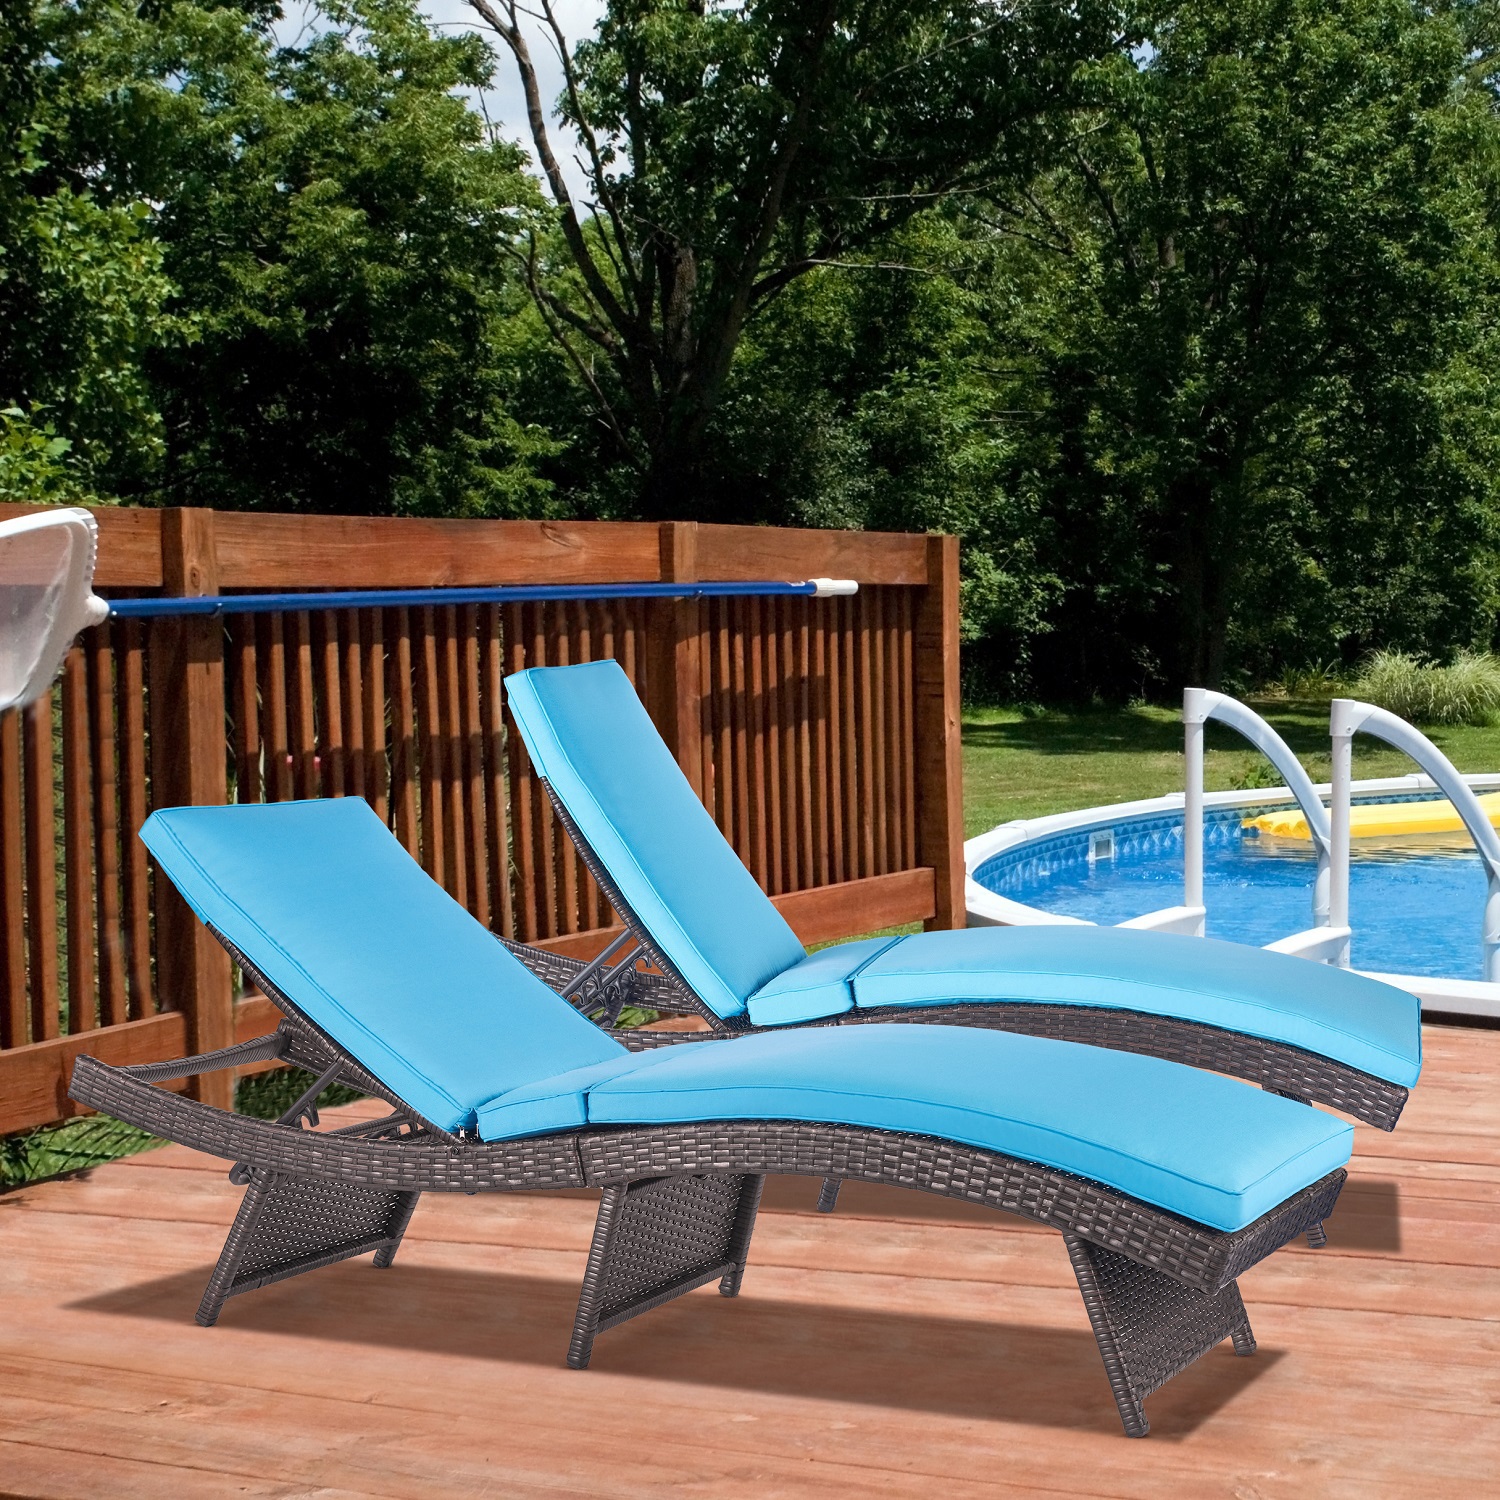 Folding Patio Wicker Chaise Lounge Chairs for Outside Set of 2 Rattan Sunbathing Chaise Lounge Chair Outdoor Assembled Reclining Sunbed Cushion Blue S Type Adjustable Backrest, No Assembly Required - image 1 of 7